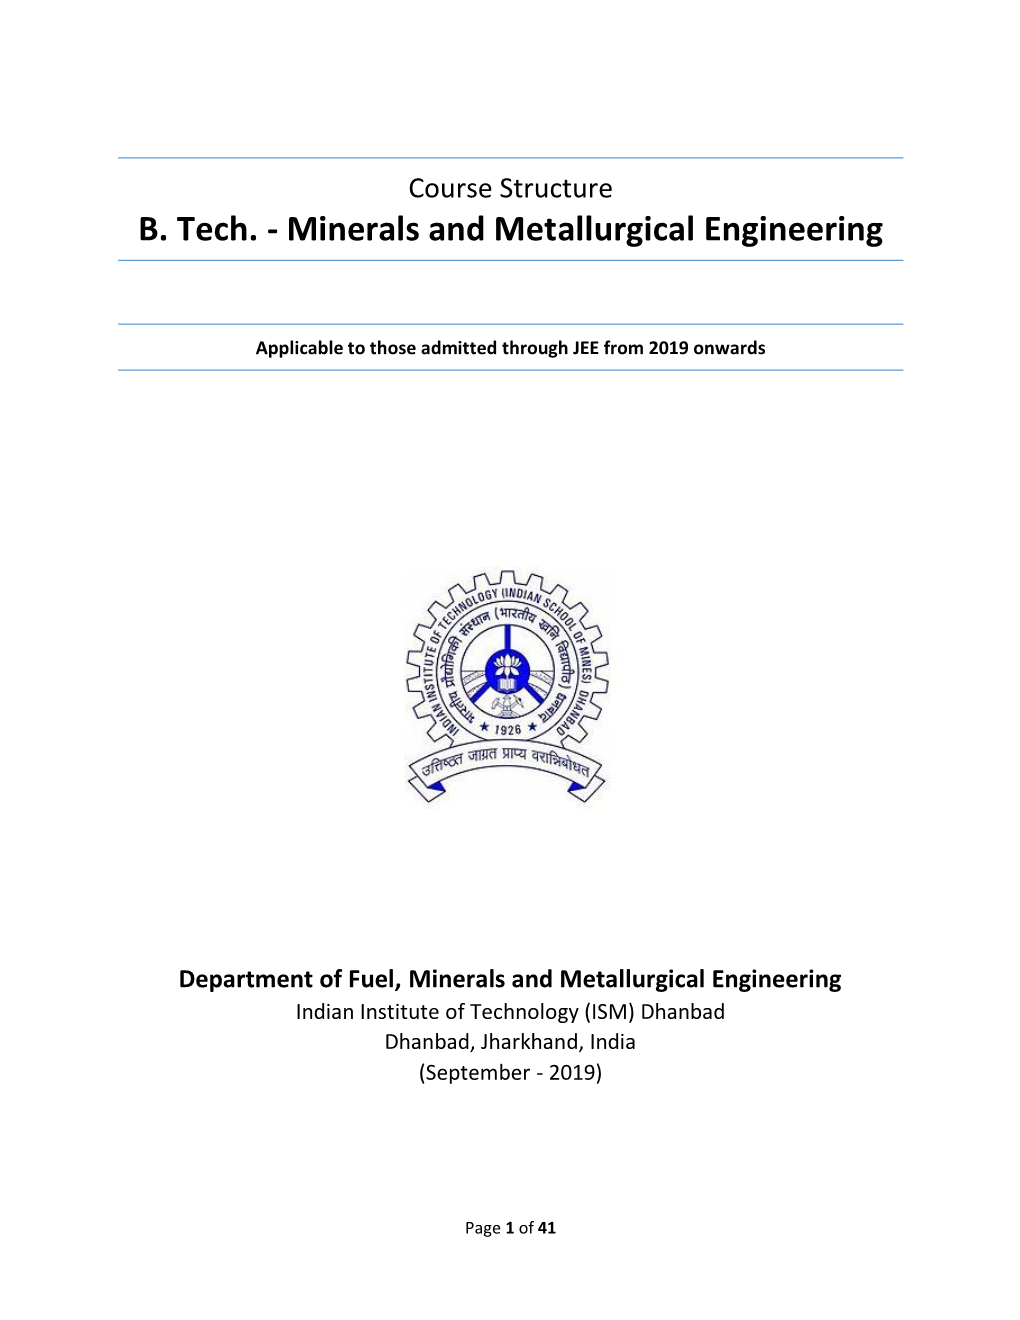 Minerals and Metallurgical Engineering